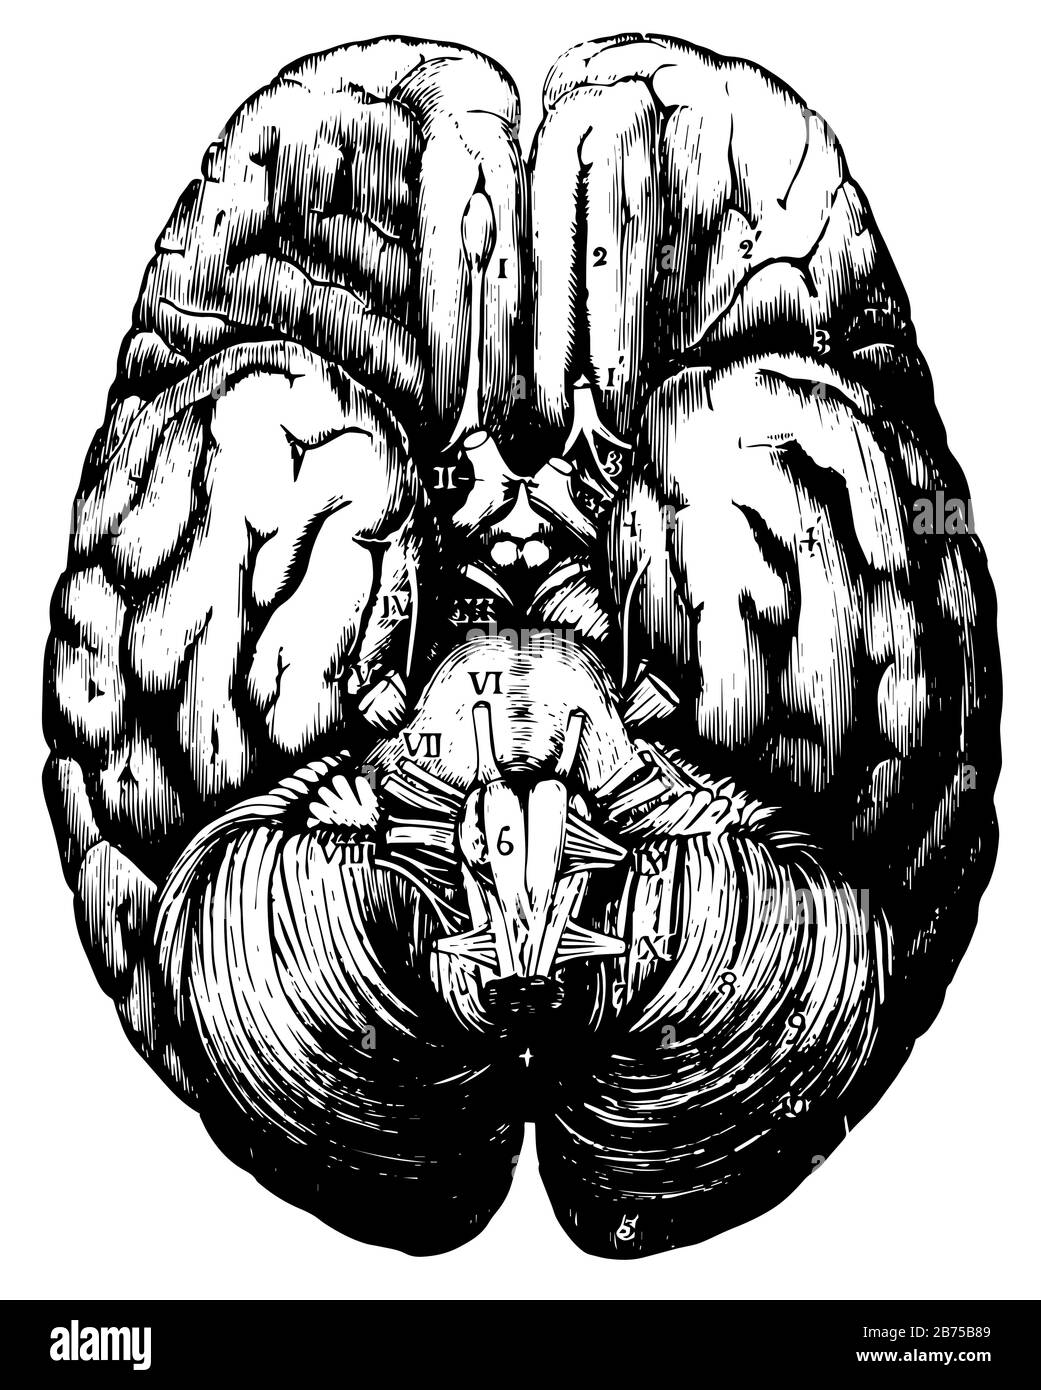 Top view of the human brain, vintage line drawing or engraving illustration. Stock Vector